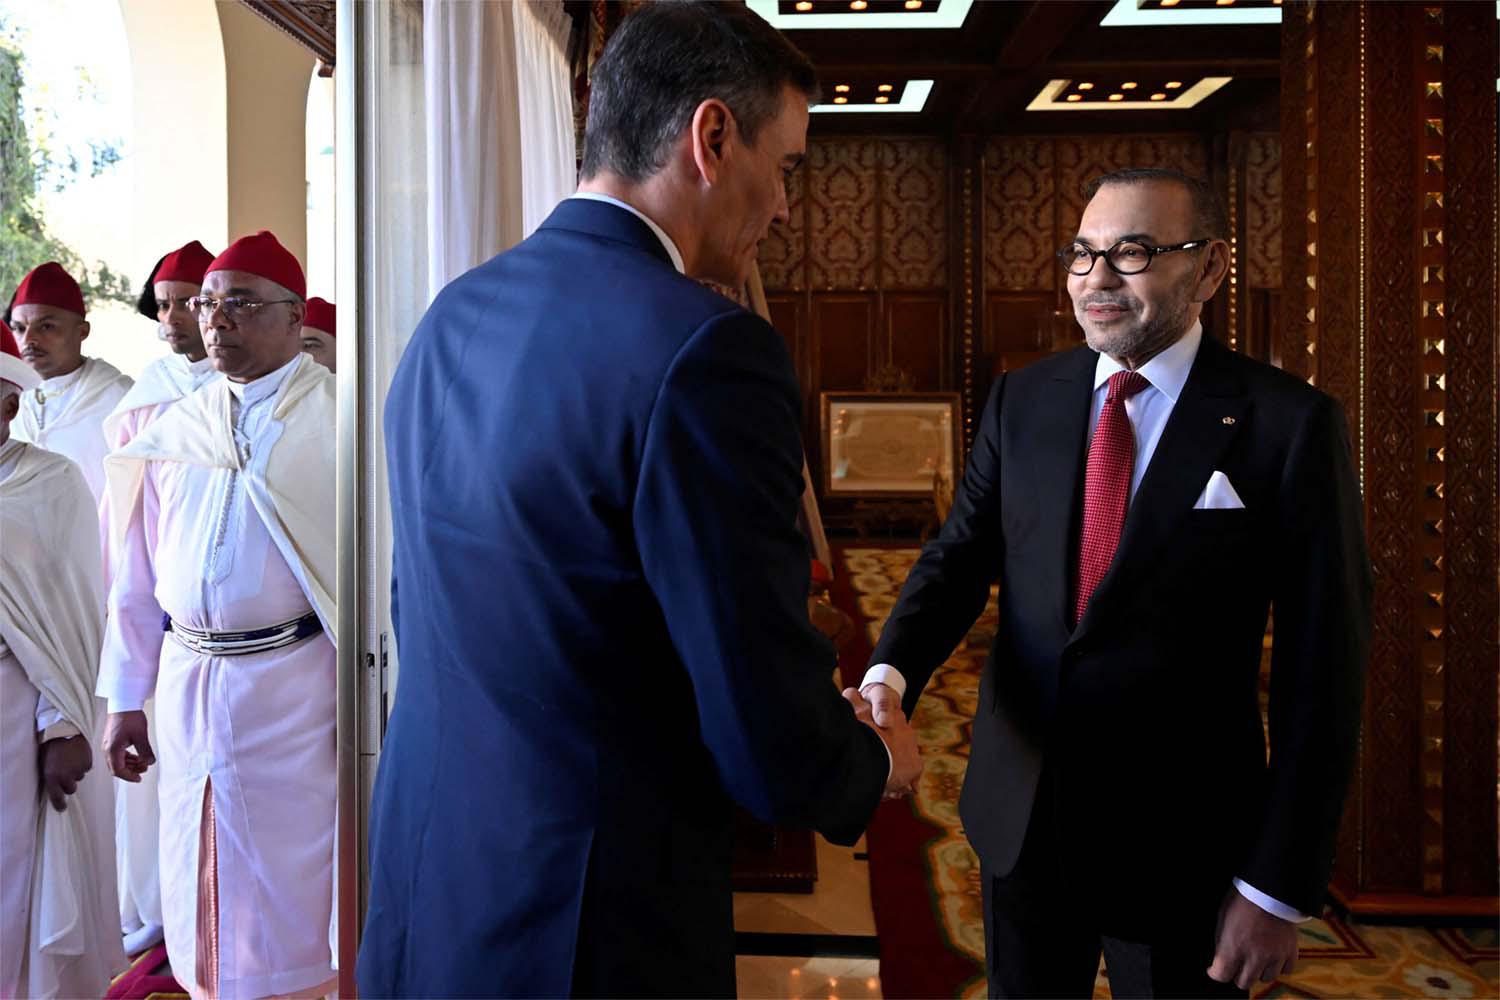 Pedro Sanchez received by King Mohammed VI at the Royal Palace in Rabat